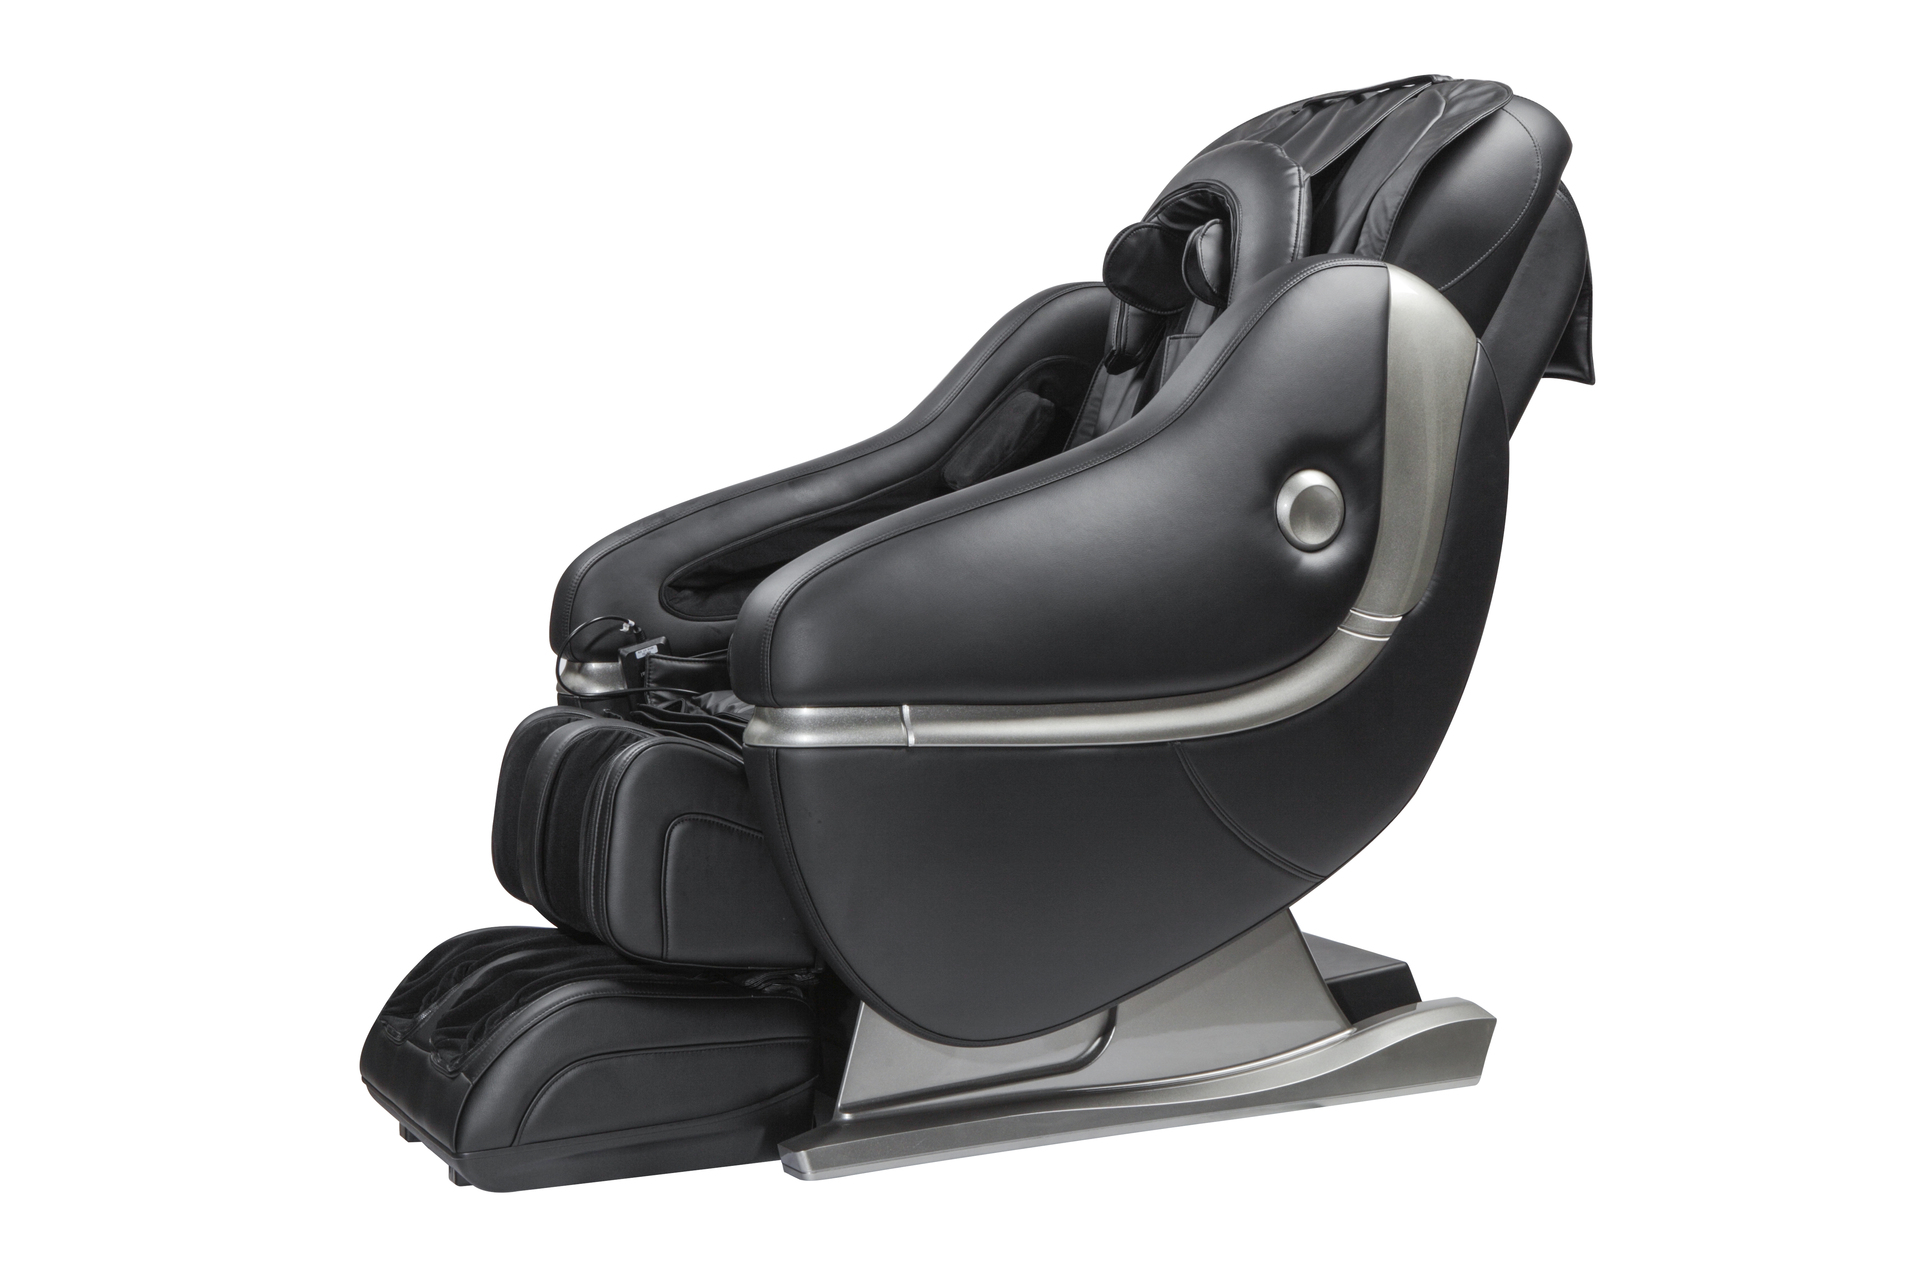 Massage Chairs For Less - Ultimate L Massage Chair